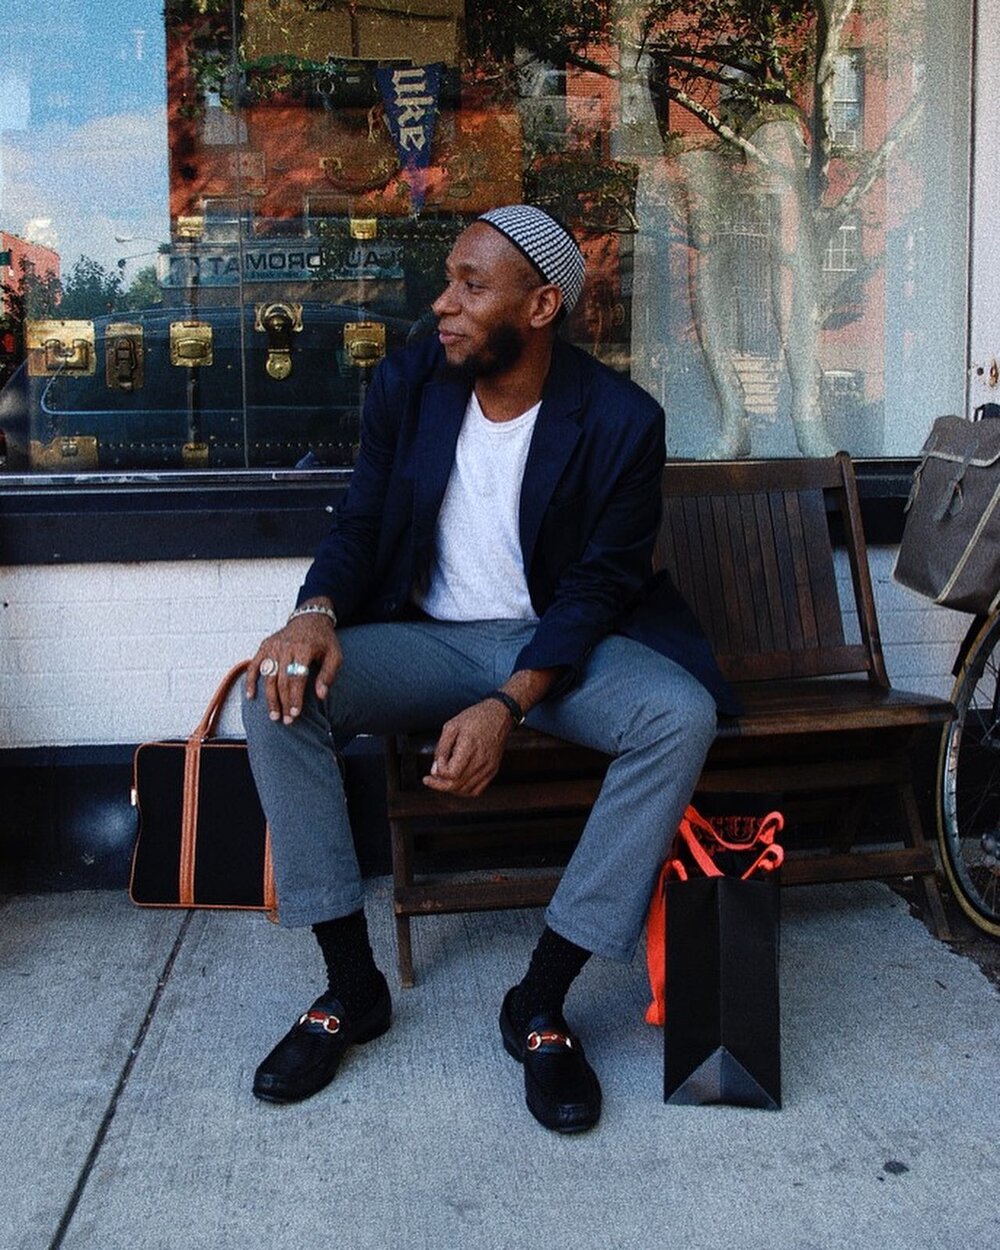 Fly Muslim Appreciation (@yasiinbey)&thinsp;
&thinsp;
@bahathmag @bahathmag @bahathmag&thinsp;
&thinsp;
Let&rsquo;s share some love, @ your favourite Modest Muslim Male fashion account below 👇🏽 &thinsp;
&thinsp;
&thinsp;
&thinsp;
#mensfashionteam #